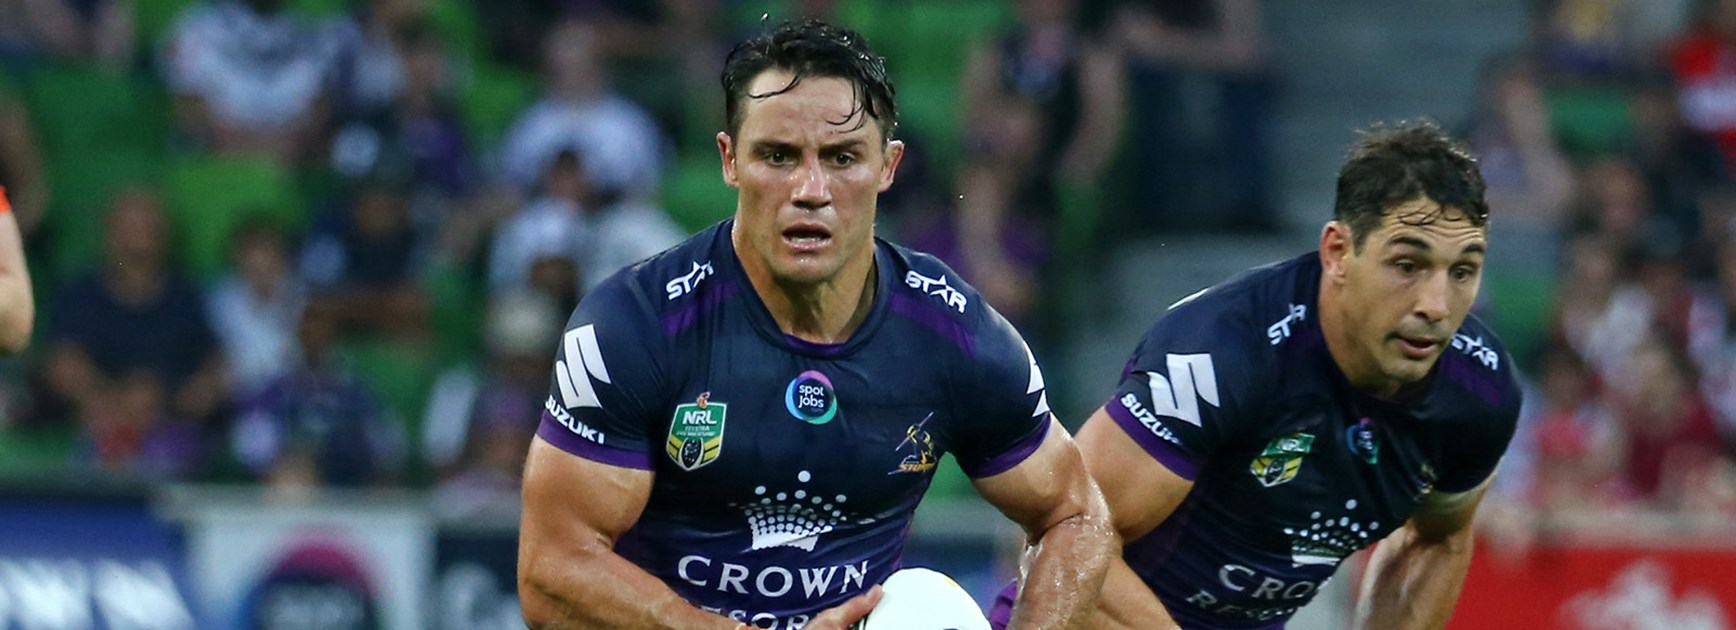 The Titans will be on high alert when Cooper Cronk has the ball in his hands.